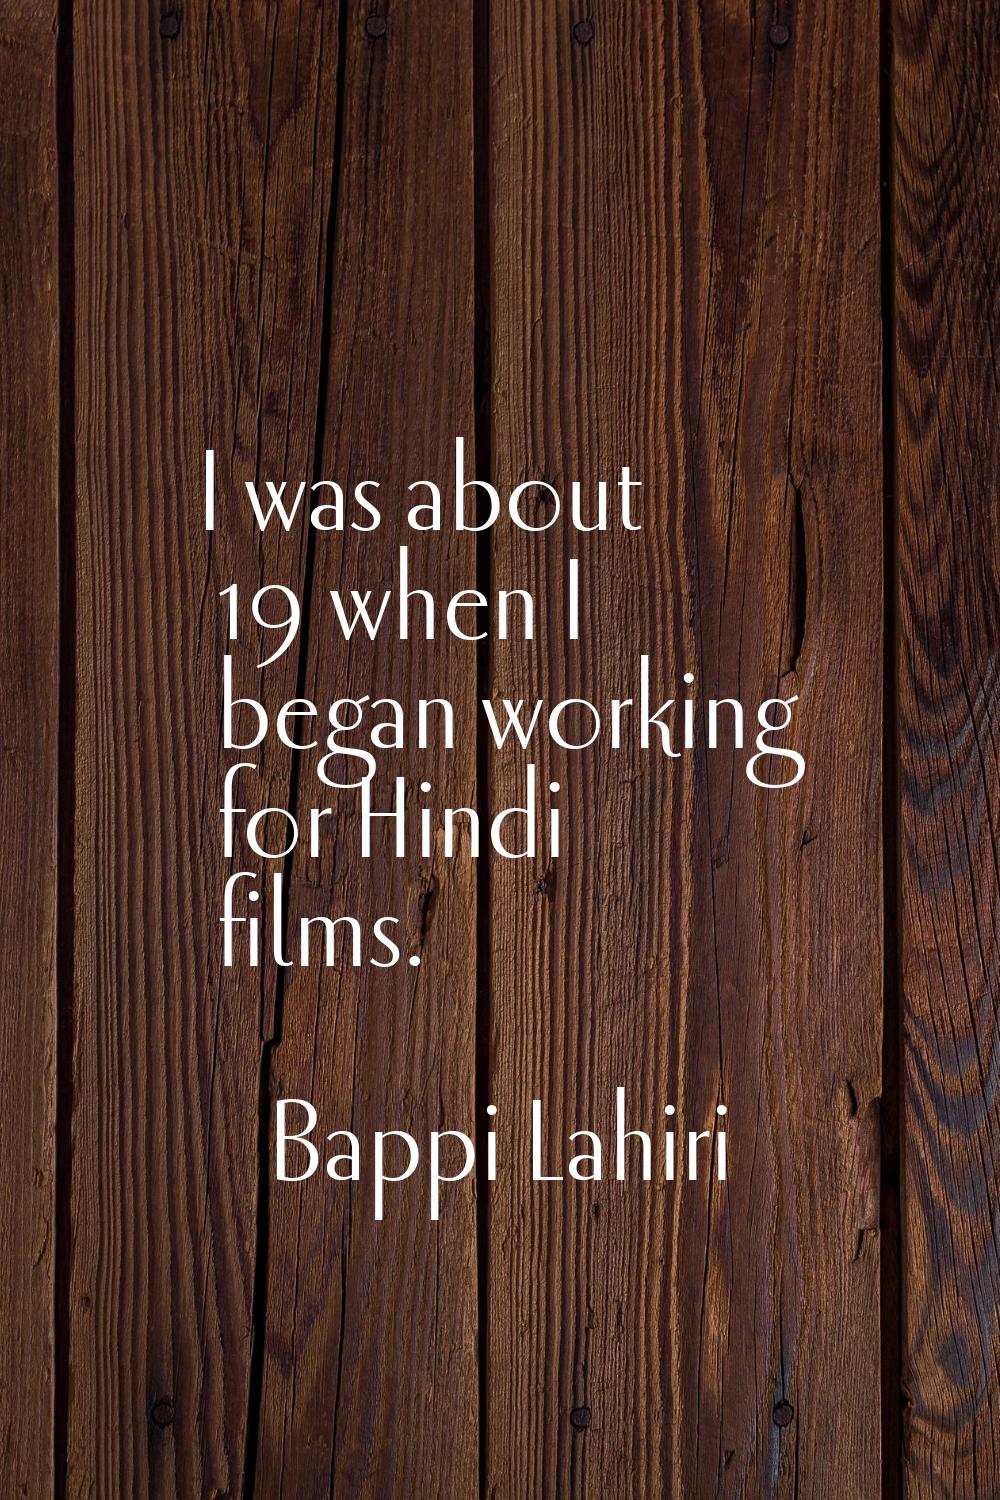 I was about 19 when I began working for Hindi films.